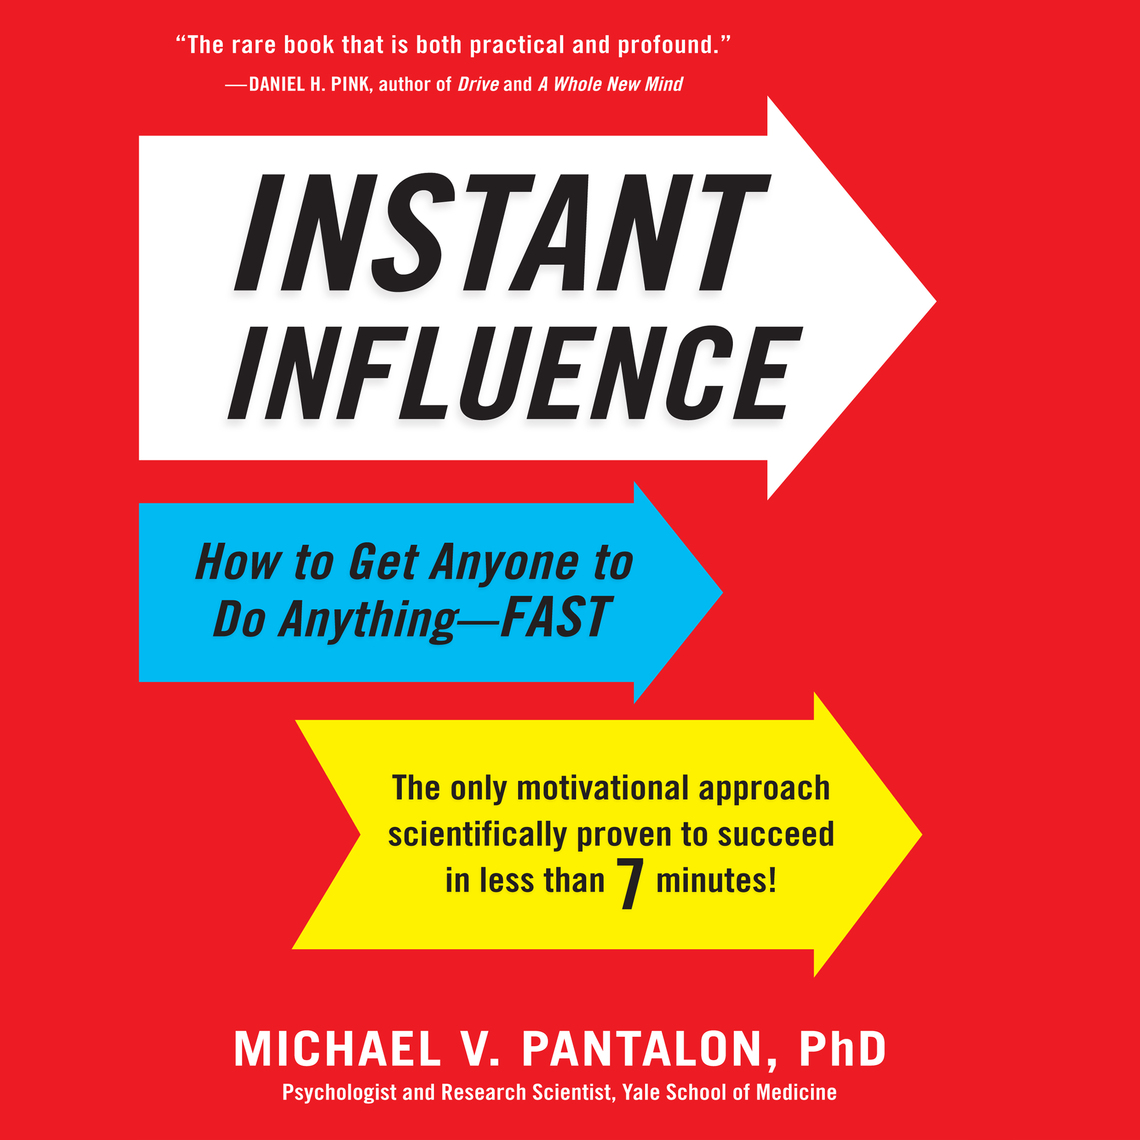 Podcast Alert: Dr. Robert Cialdini - Influence at Work